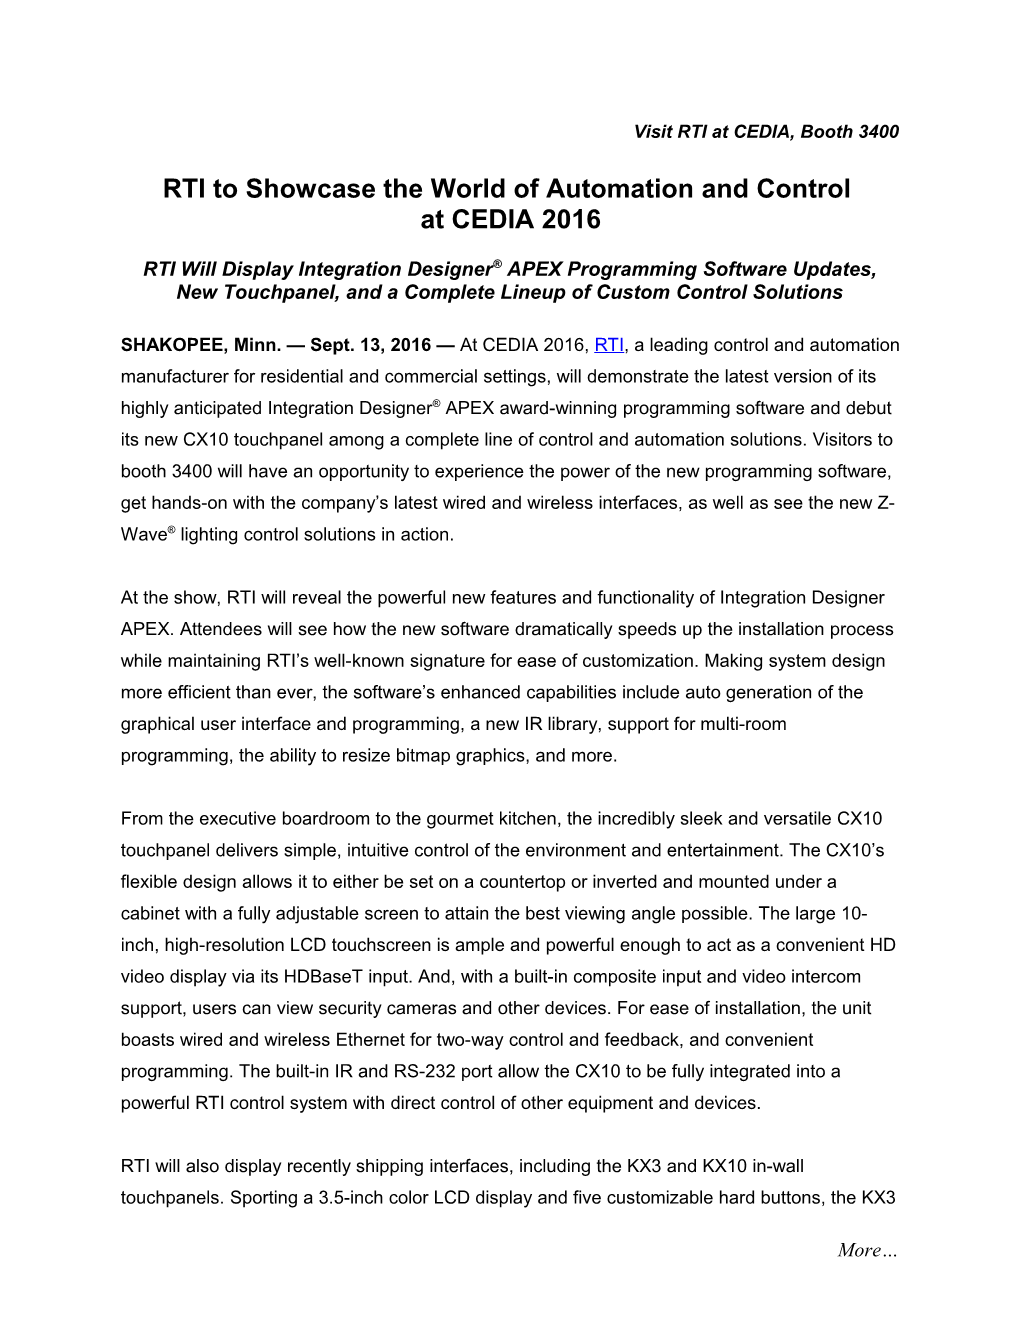 RTI to Showcase the World of Automation and Control